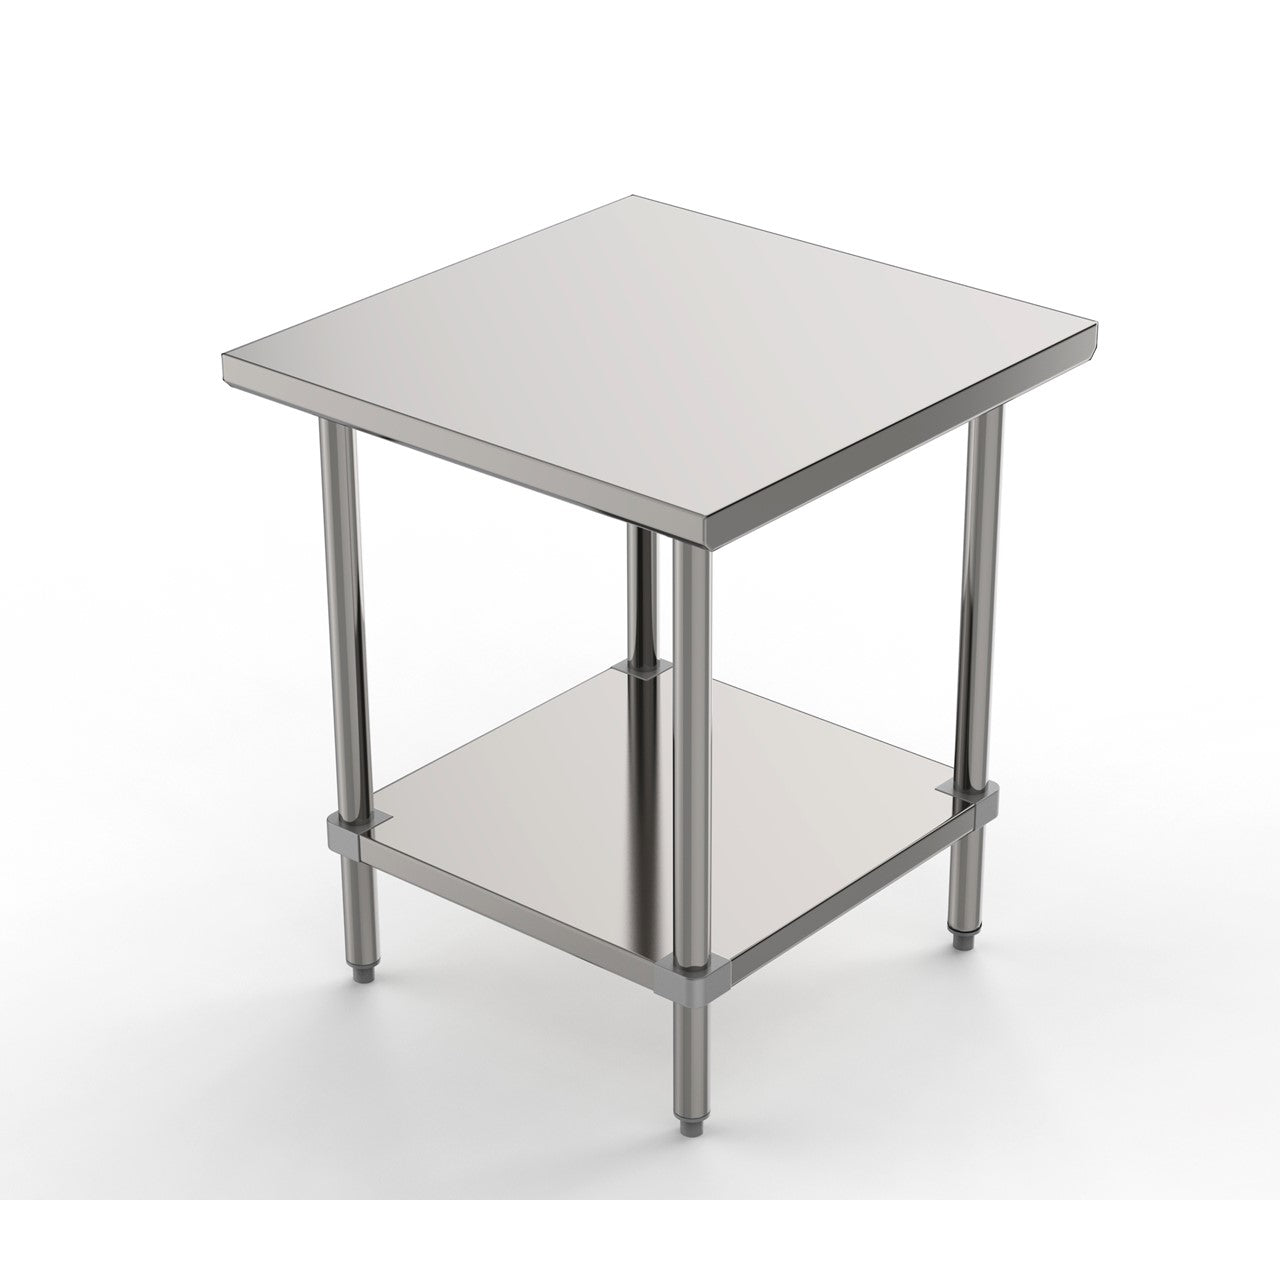 GSW Commercial Grade Flat Top Work Table with Stainless Steel Top, Galvanized Undershelf & Legs, Adjustable Bullet Feet, NSF/ETL Approved to Meet Sanitation Food Service Standard 37 (30"W x 30"L x 35"H)